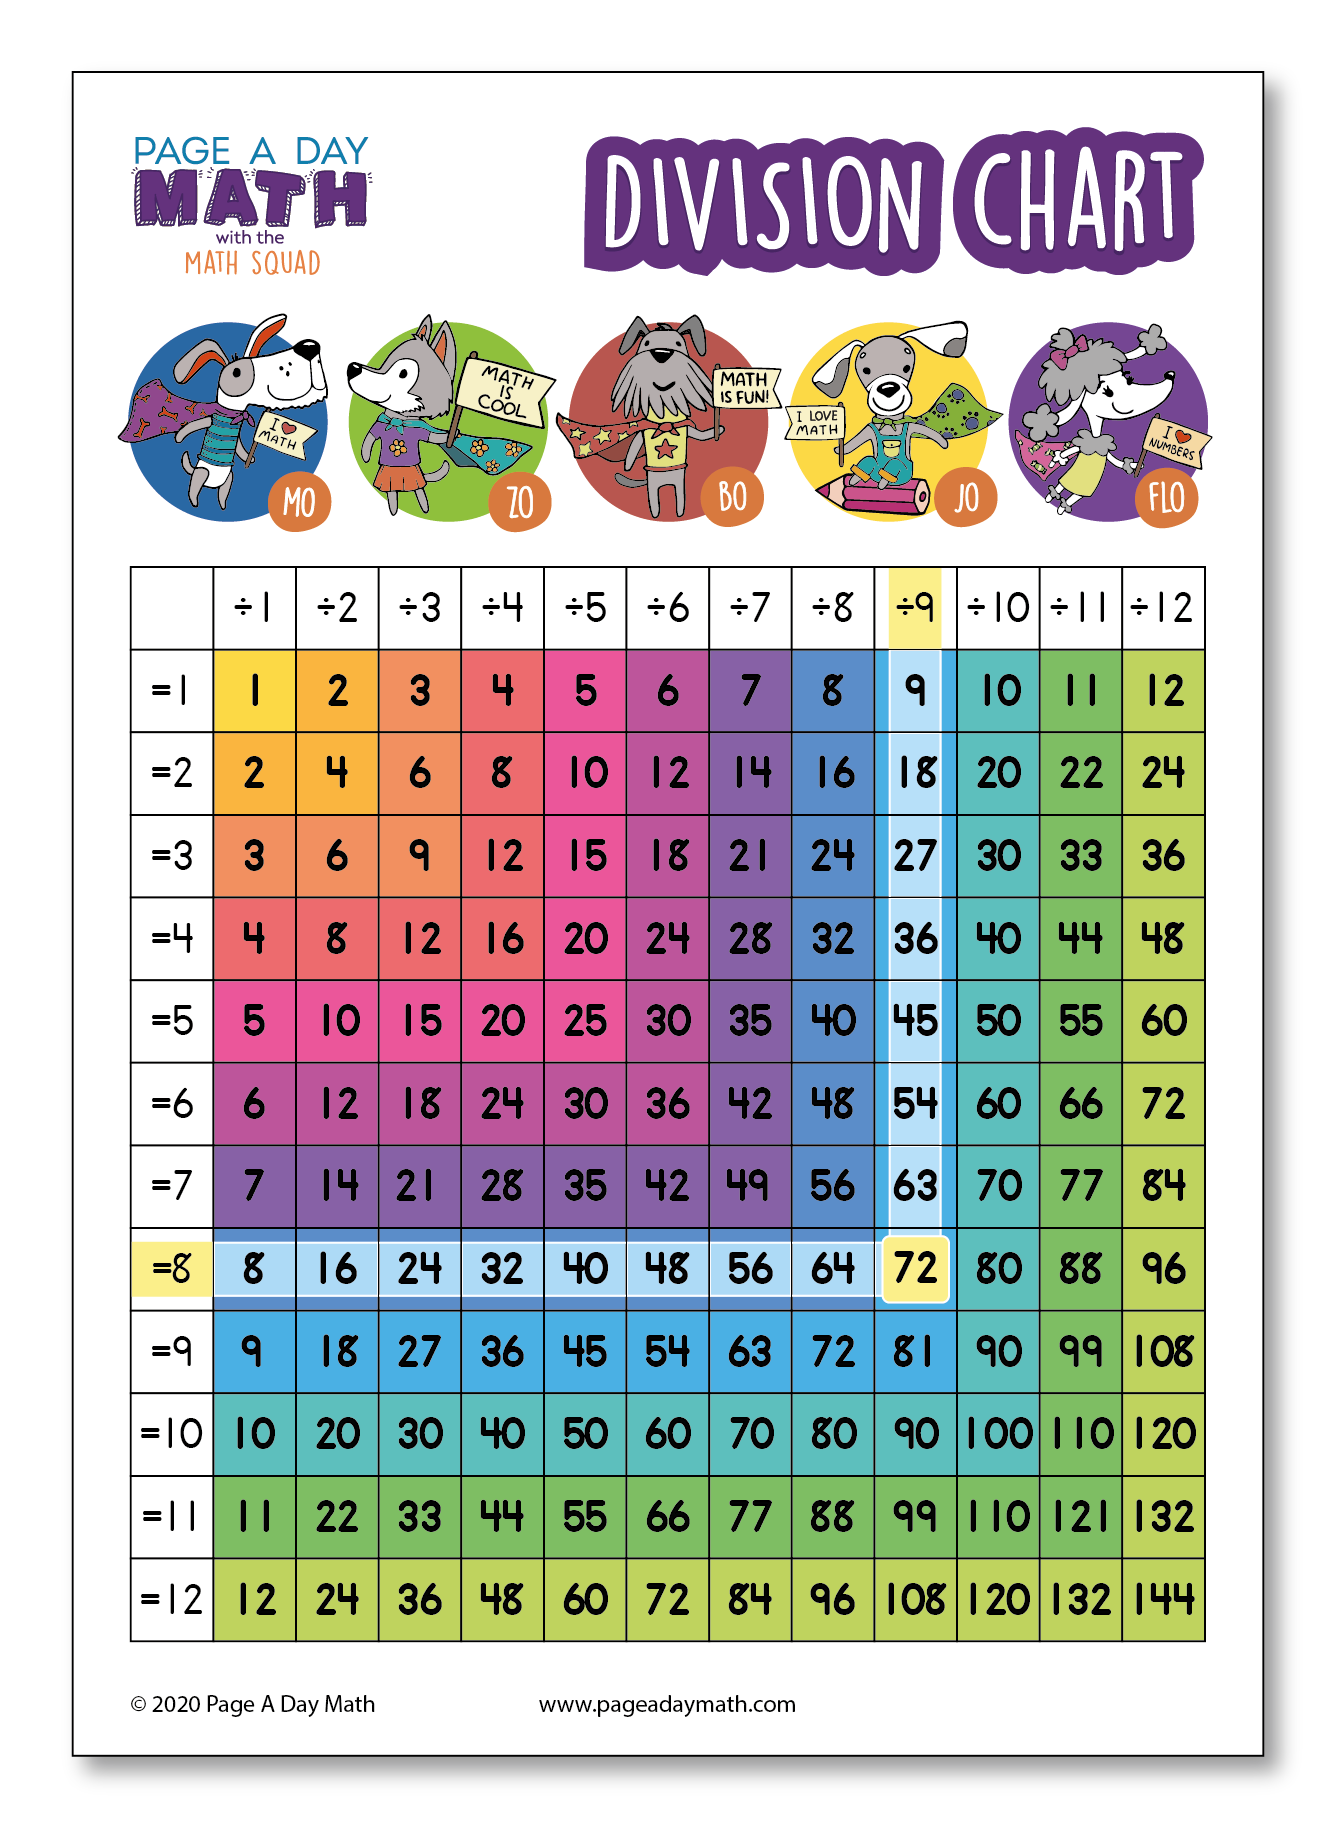 Printable Division Table Chart 1 12